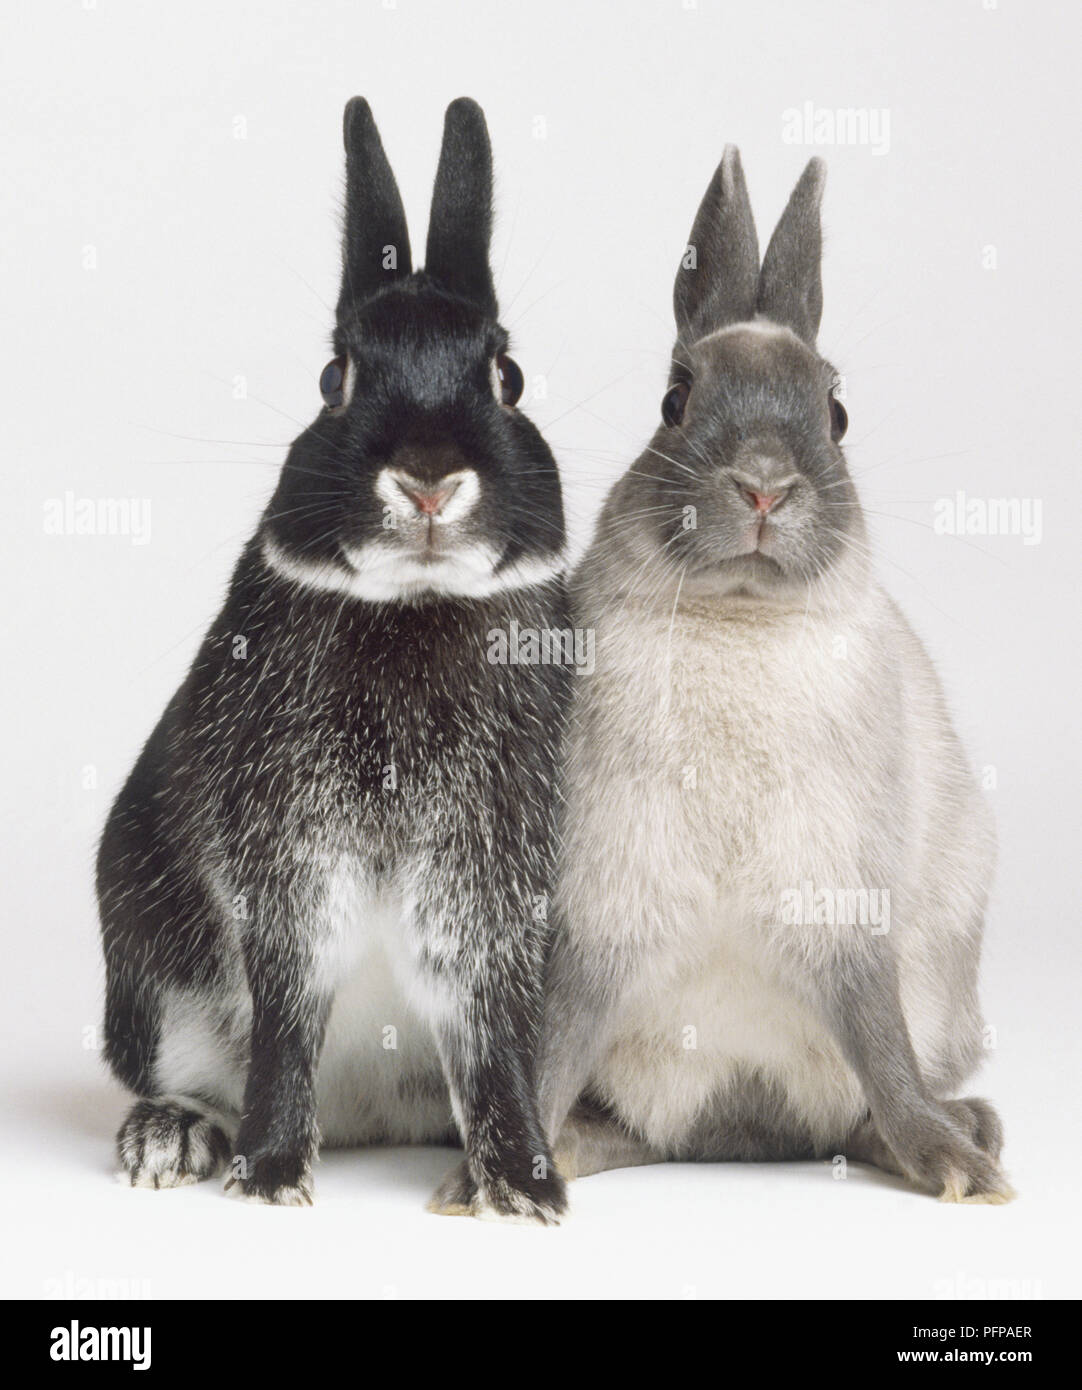 Black and grey Rabbits (Oryctolagus cuniculus) sitting side by side looking at camera, front view Stock Photo